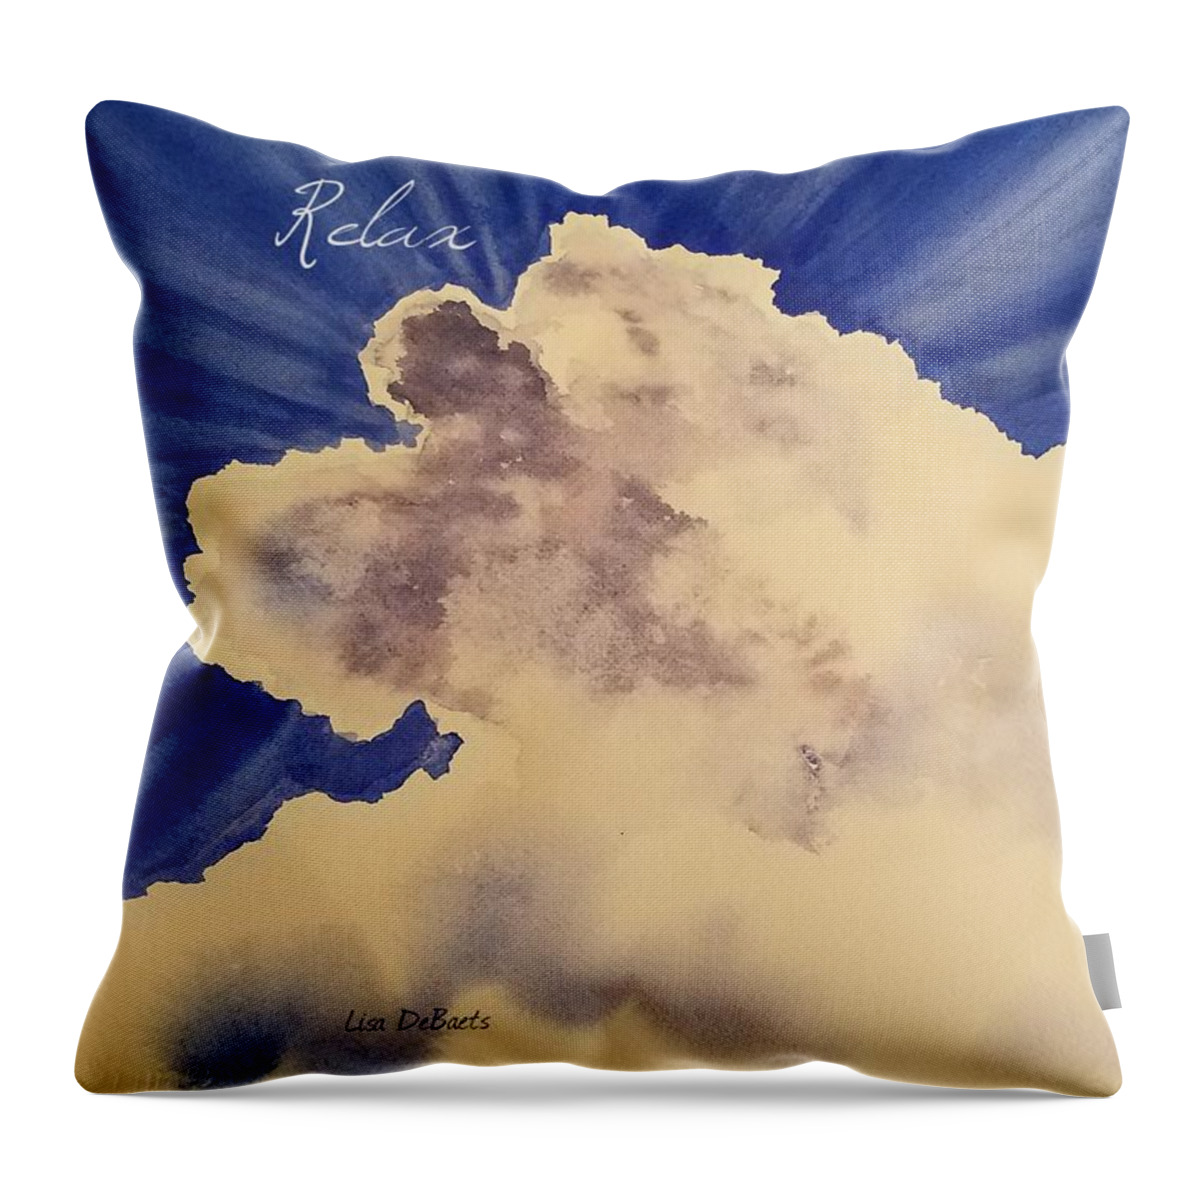 Mindfulness Throw Pillow featuring the painting Relax by Lisa Debaets